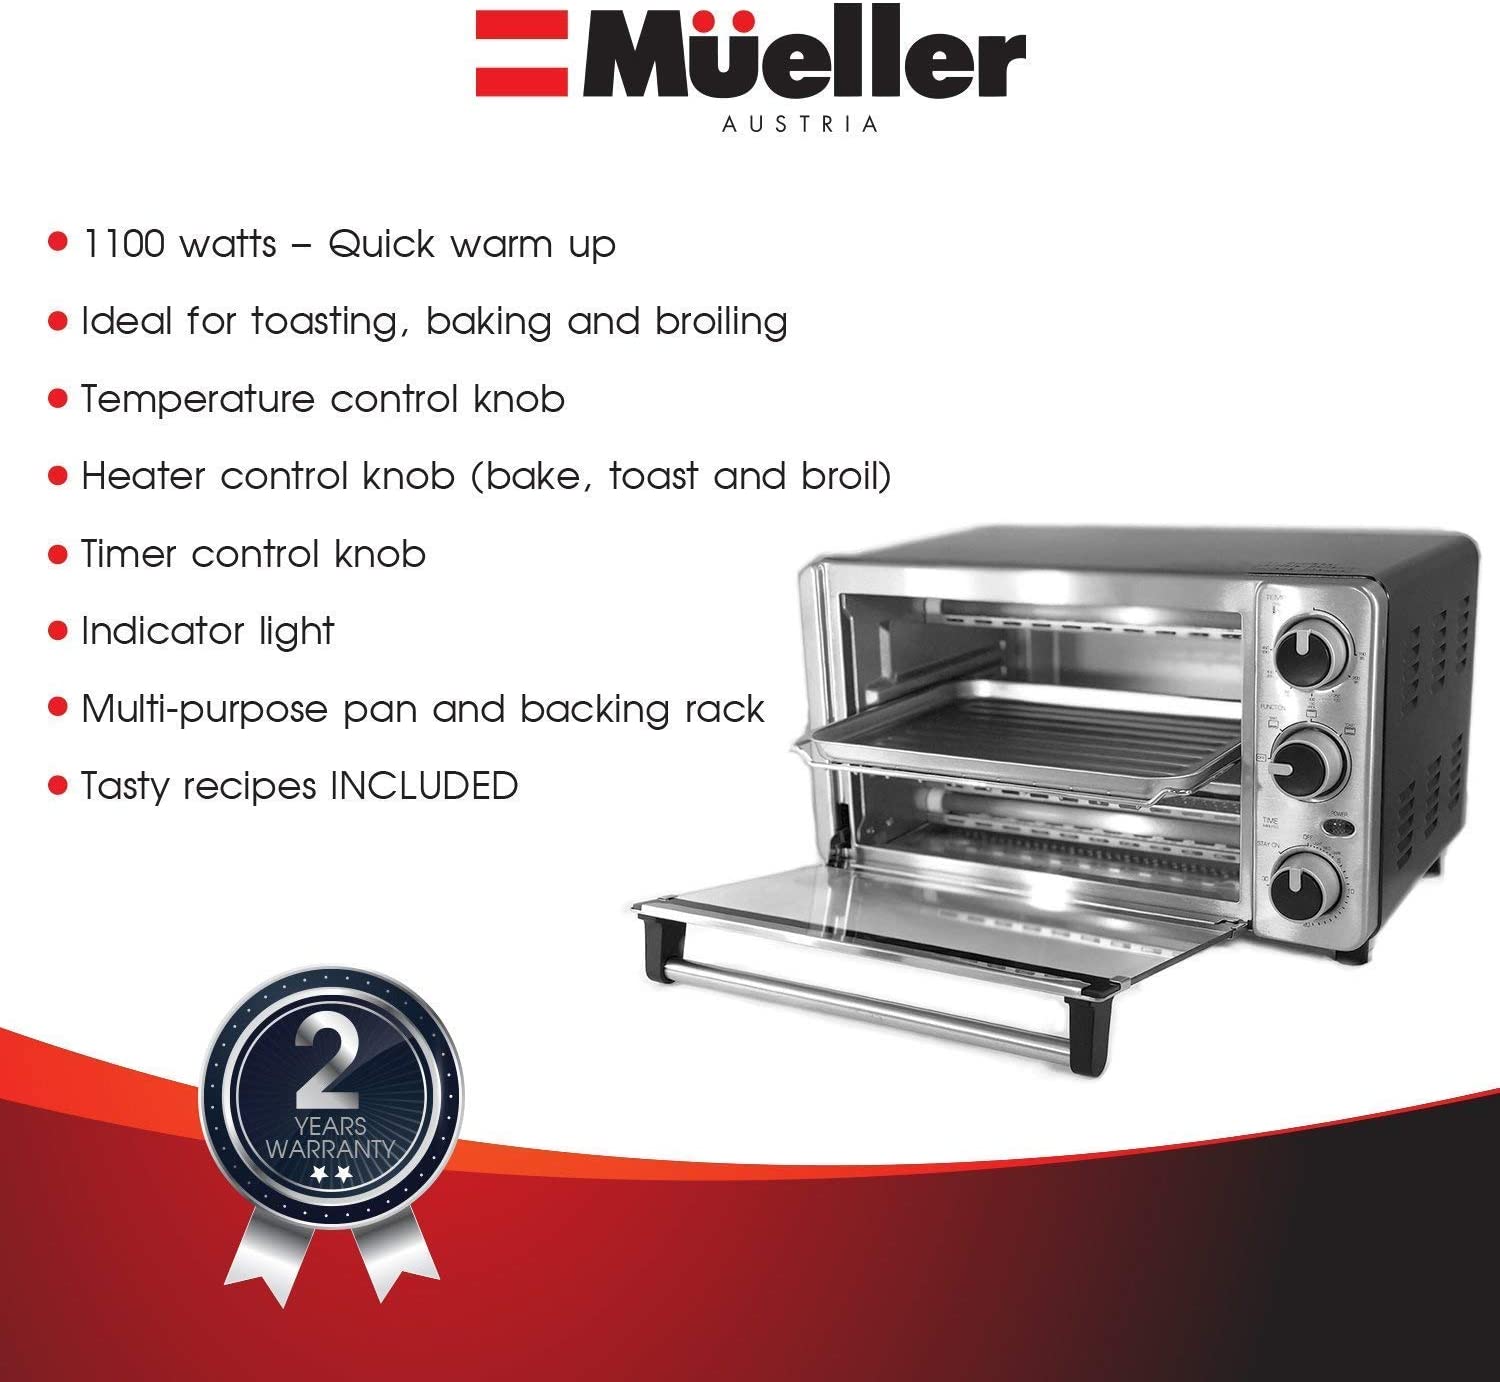 https://bigbigmart.com/wp-content/uploads/2023/06/Mueller-Austria-Toaster-Oven-4-Slice-Multi-function-Stainless-Steel-Finish-with-Timer-Toast-Bake-Broil-Settings-Natural-Convection-1100-Watts-of-Power-Includes-Baking-Pan-and-Rack4.jpg